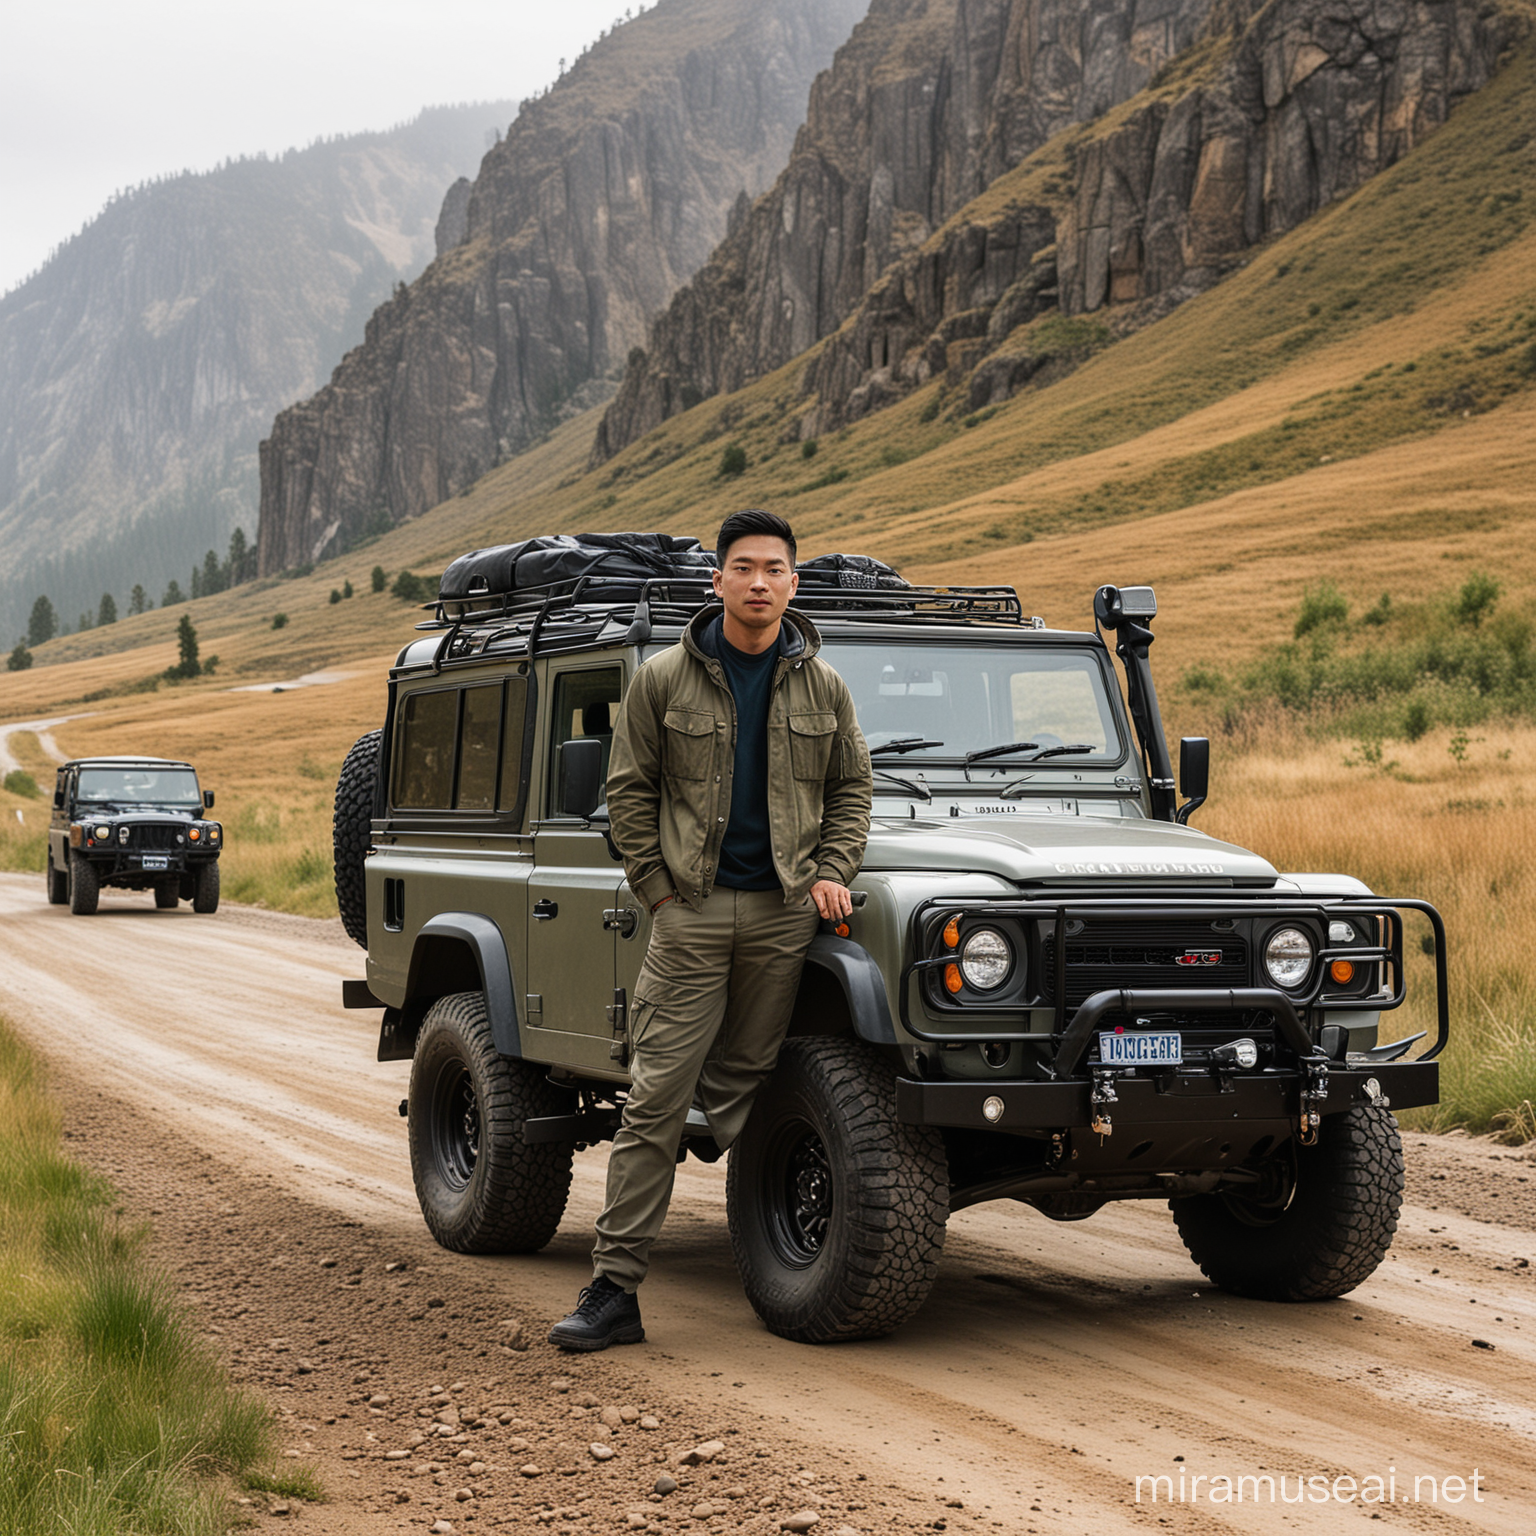 asian men, clothing jackets, trousers,men's shoes,standing in front of a jeep parked on the side of a dirt road, humvee, steel body, rolling foothills, adventure gear, vehicle design trends, land rover defender, tough, off-road, mahindra thar, jeep in background, mountain climbing in washington, rambler, vehicle photography, rocky terrain, high mountains, with roof rack, pacific northwest, travel and adventure